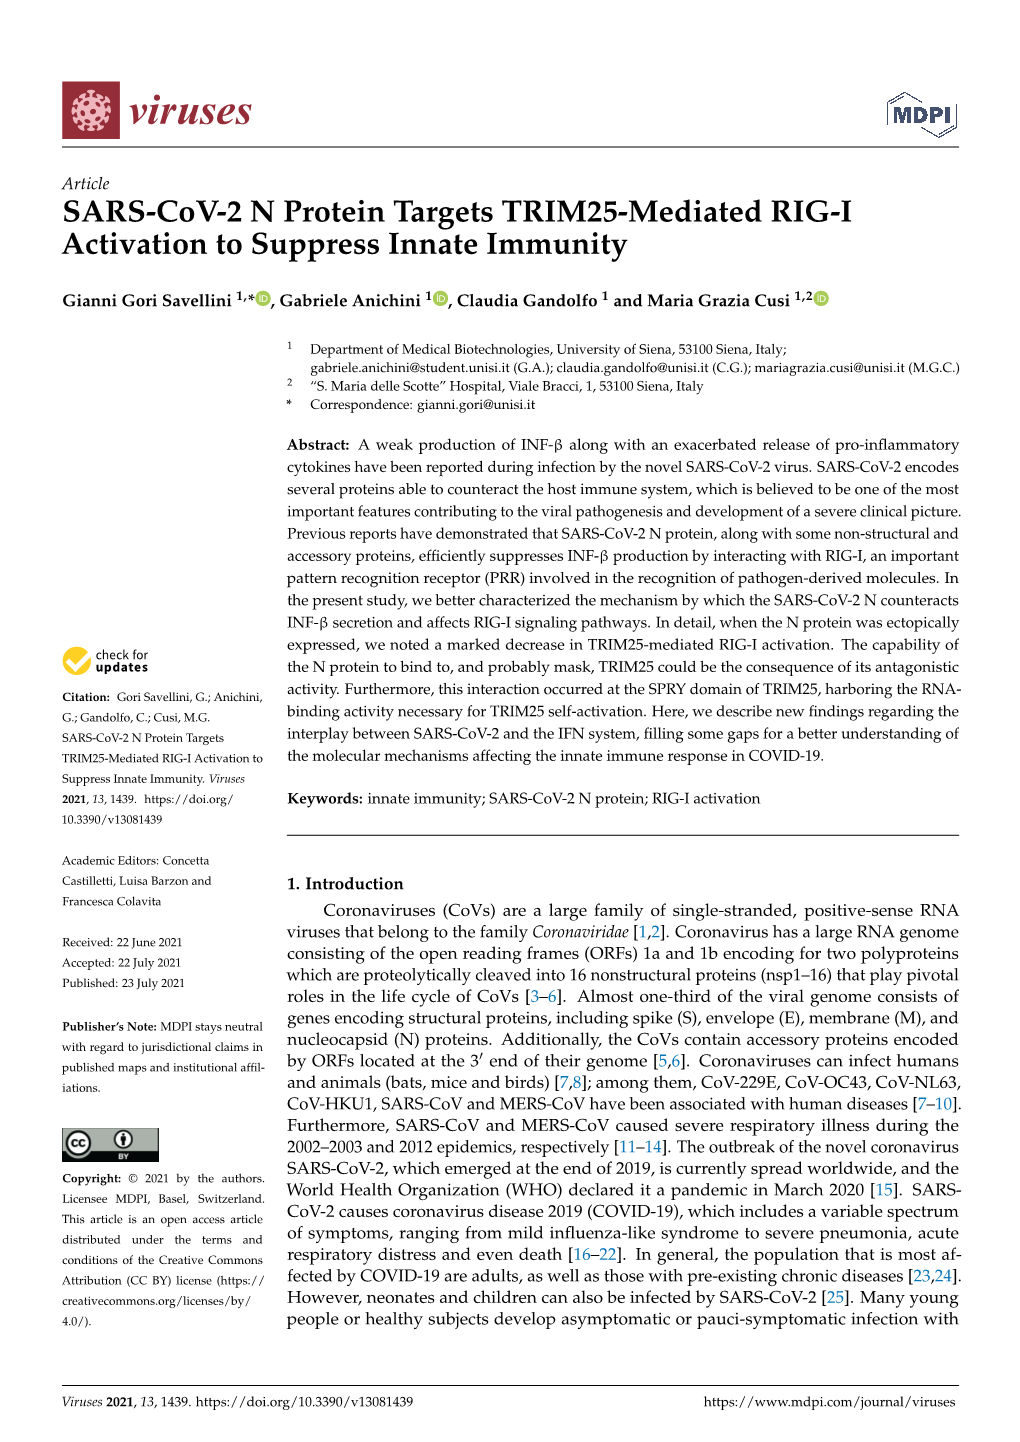 SARS-Cov-2 N Protein Targets TRIM25-Mediated RIG-I Activation to Suppress Innate Immunity